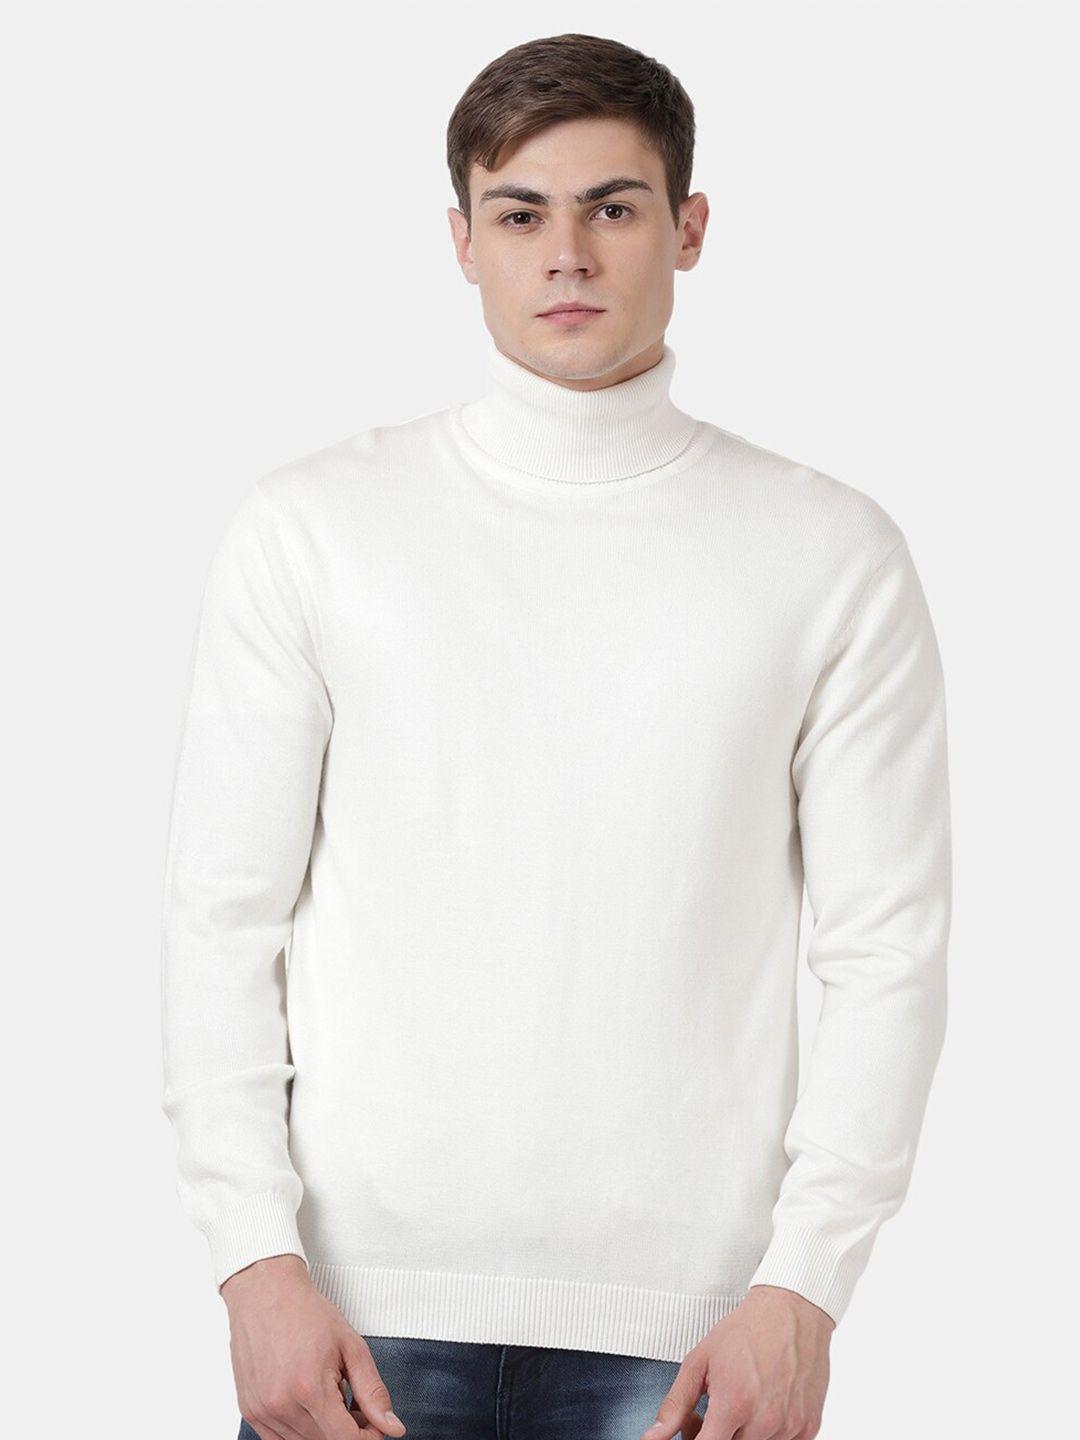 t-base-turtle-neck-long-sleeves-cable-knit-cotton-pullover